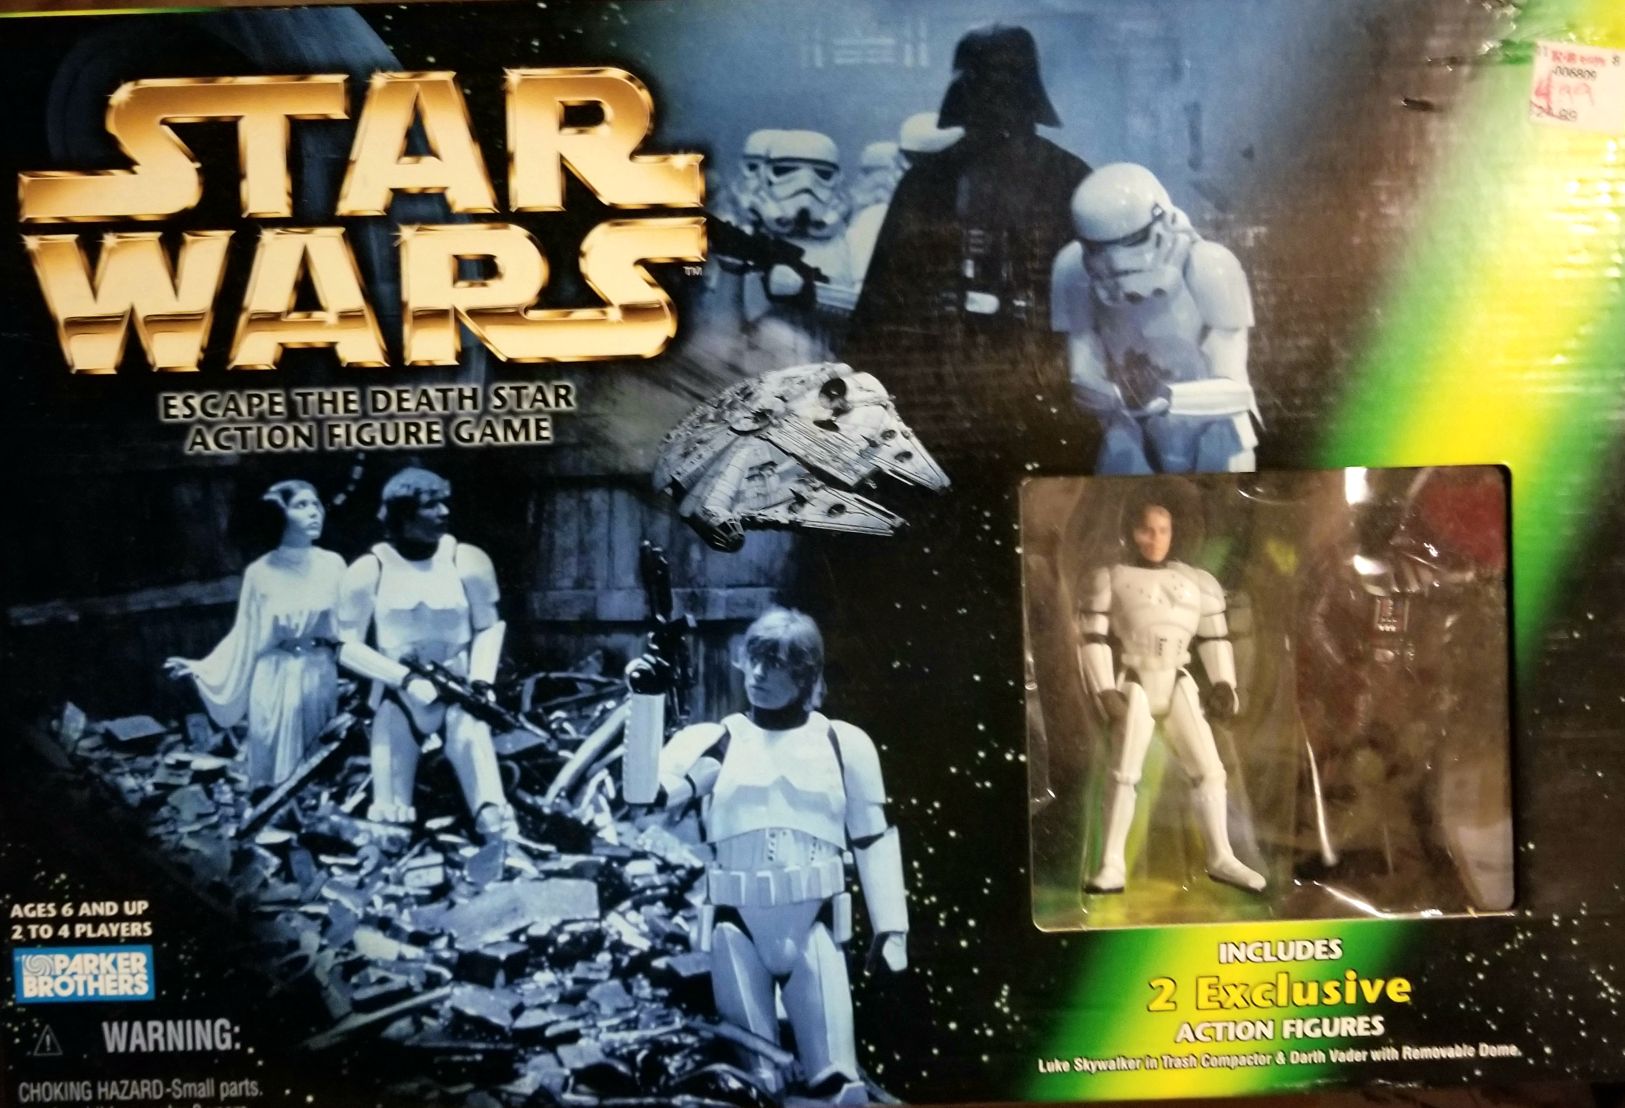 Power of the Force 2 Green Playset 3.75 - Escape The Death Star Action Figure Game Star Wars ANH - Kenner/ Hasbro (Star Wars Episode IV A New Hope) action figure collectible - Main Image 1